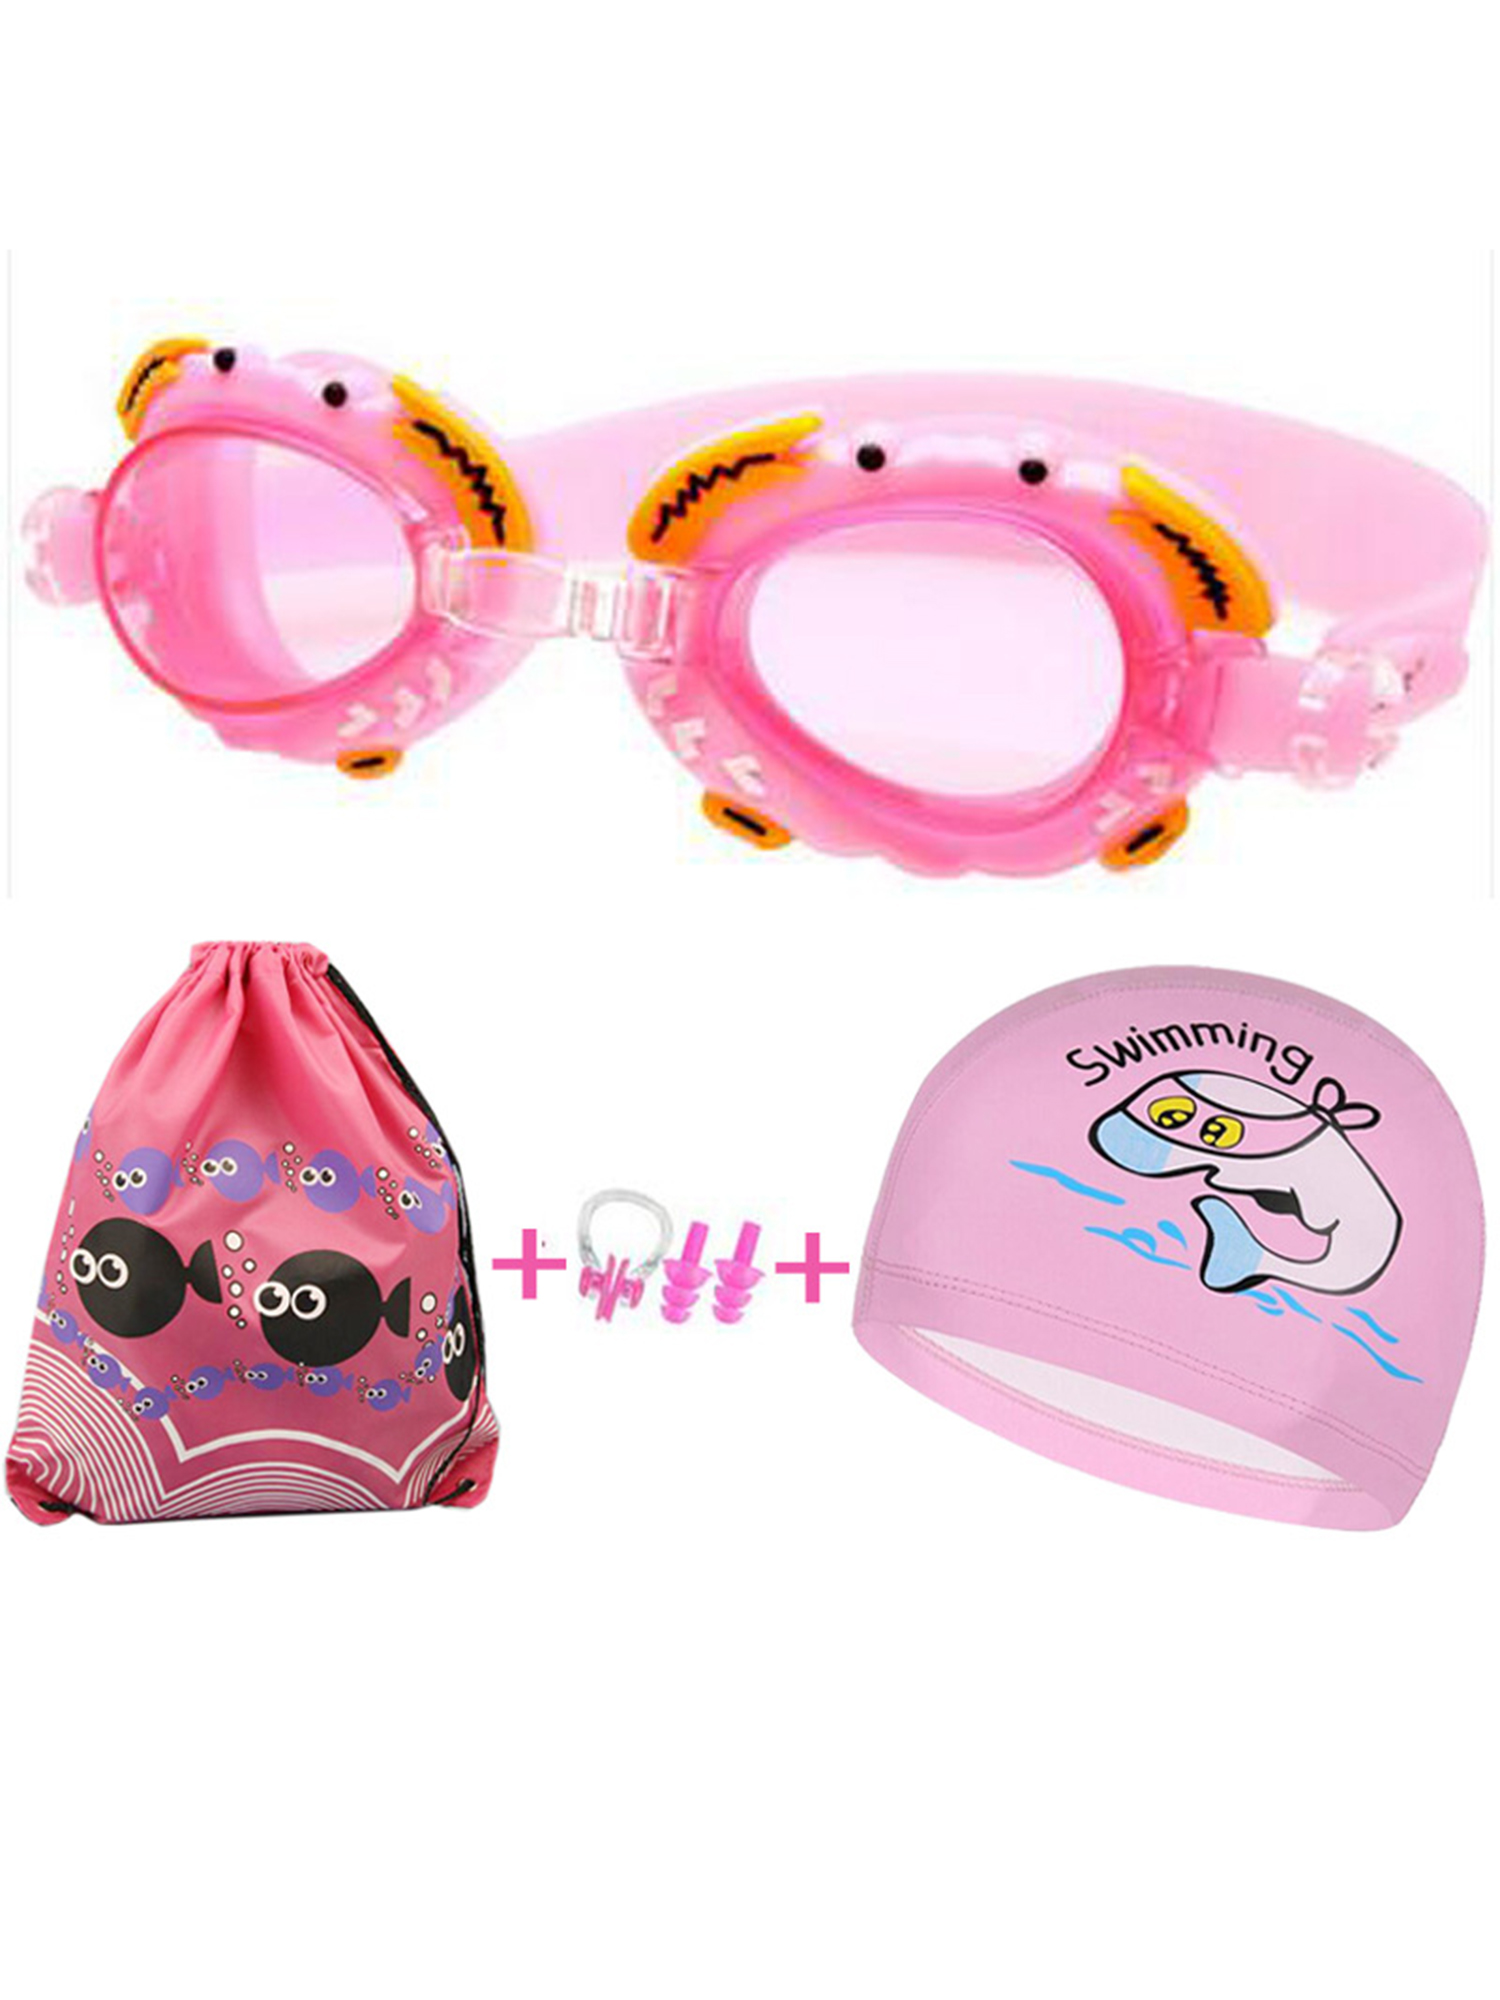 Anyprize 5-12 Years Kid's Waterproof Swim Goggles Anti Fog , Children Swimming Goggels with Nose Clip, Ear Plugs, Protection Case, (A064PK, Pink) - image 1 of 3